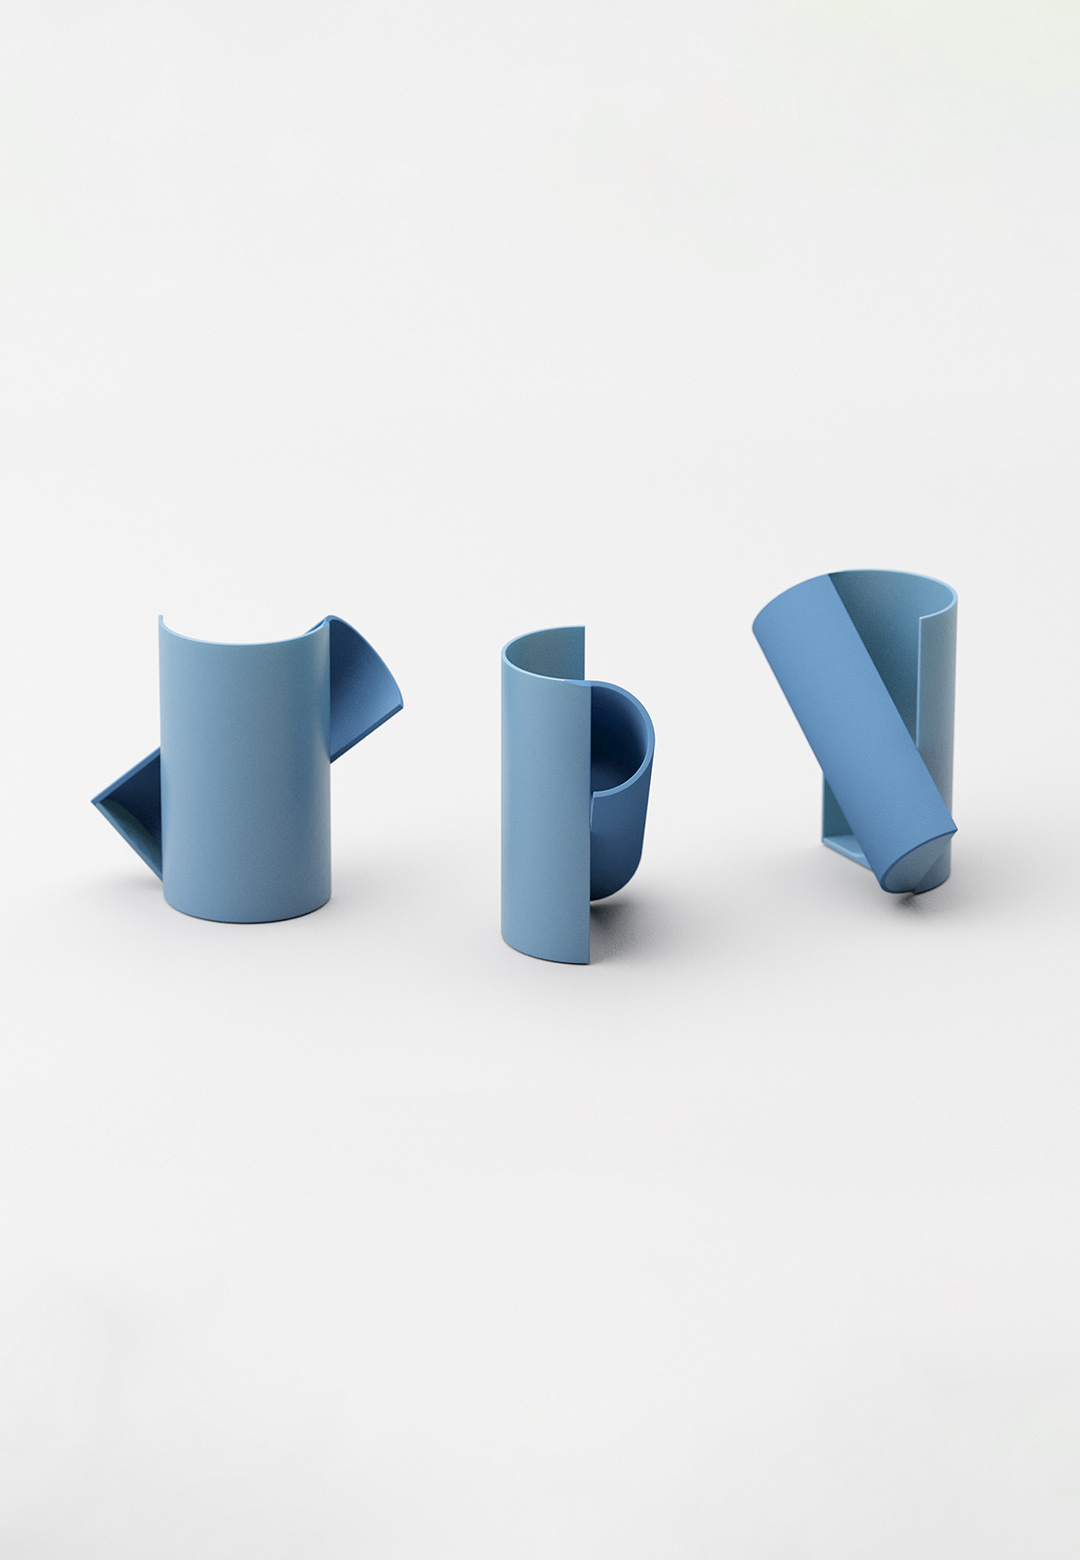 Deniz Aktay’s desk accessories are containers of fun, function and imagination